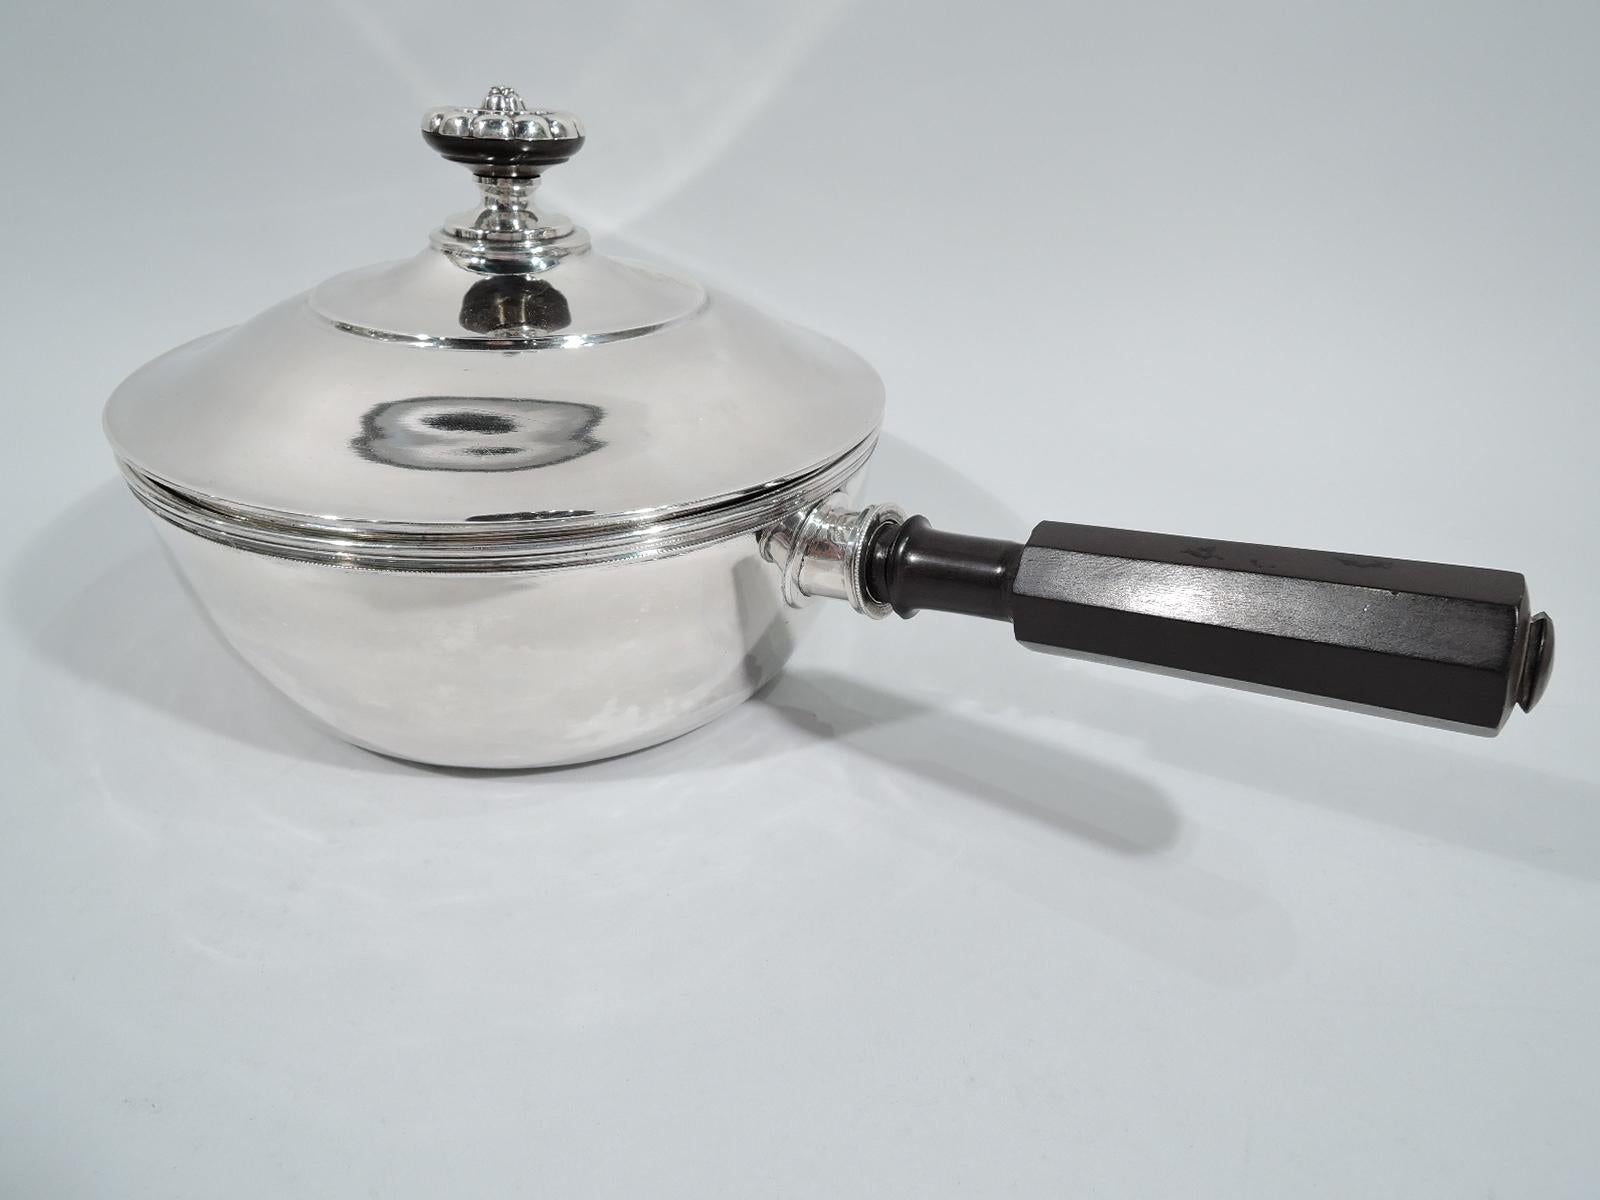 Swiss Biedermeier silver chafing dish, 19th century. Round with gently curved sides and molded rim. Handle faceted stained wood. Beading. Cover gently raised with naïve-style flower head finial. Marked.

Overall dimensions: H 6 1/2 x W 14 x D 8